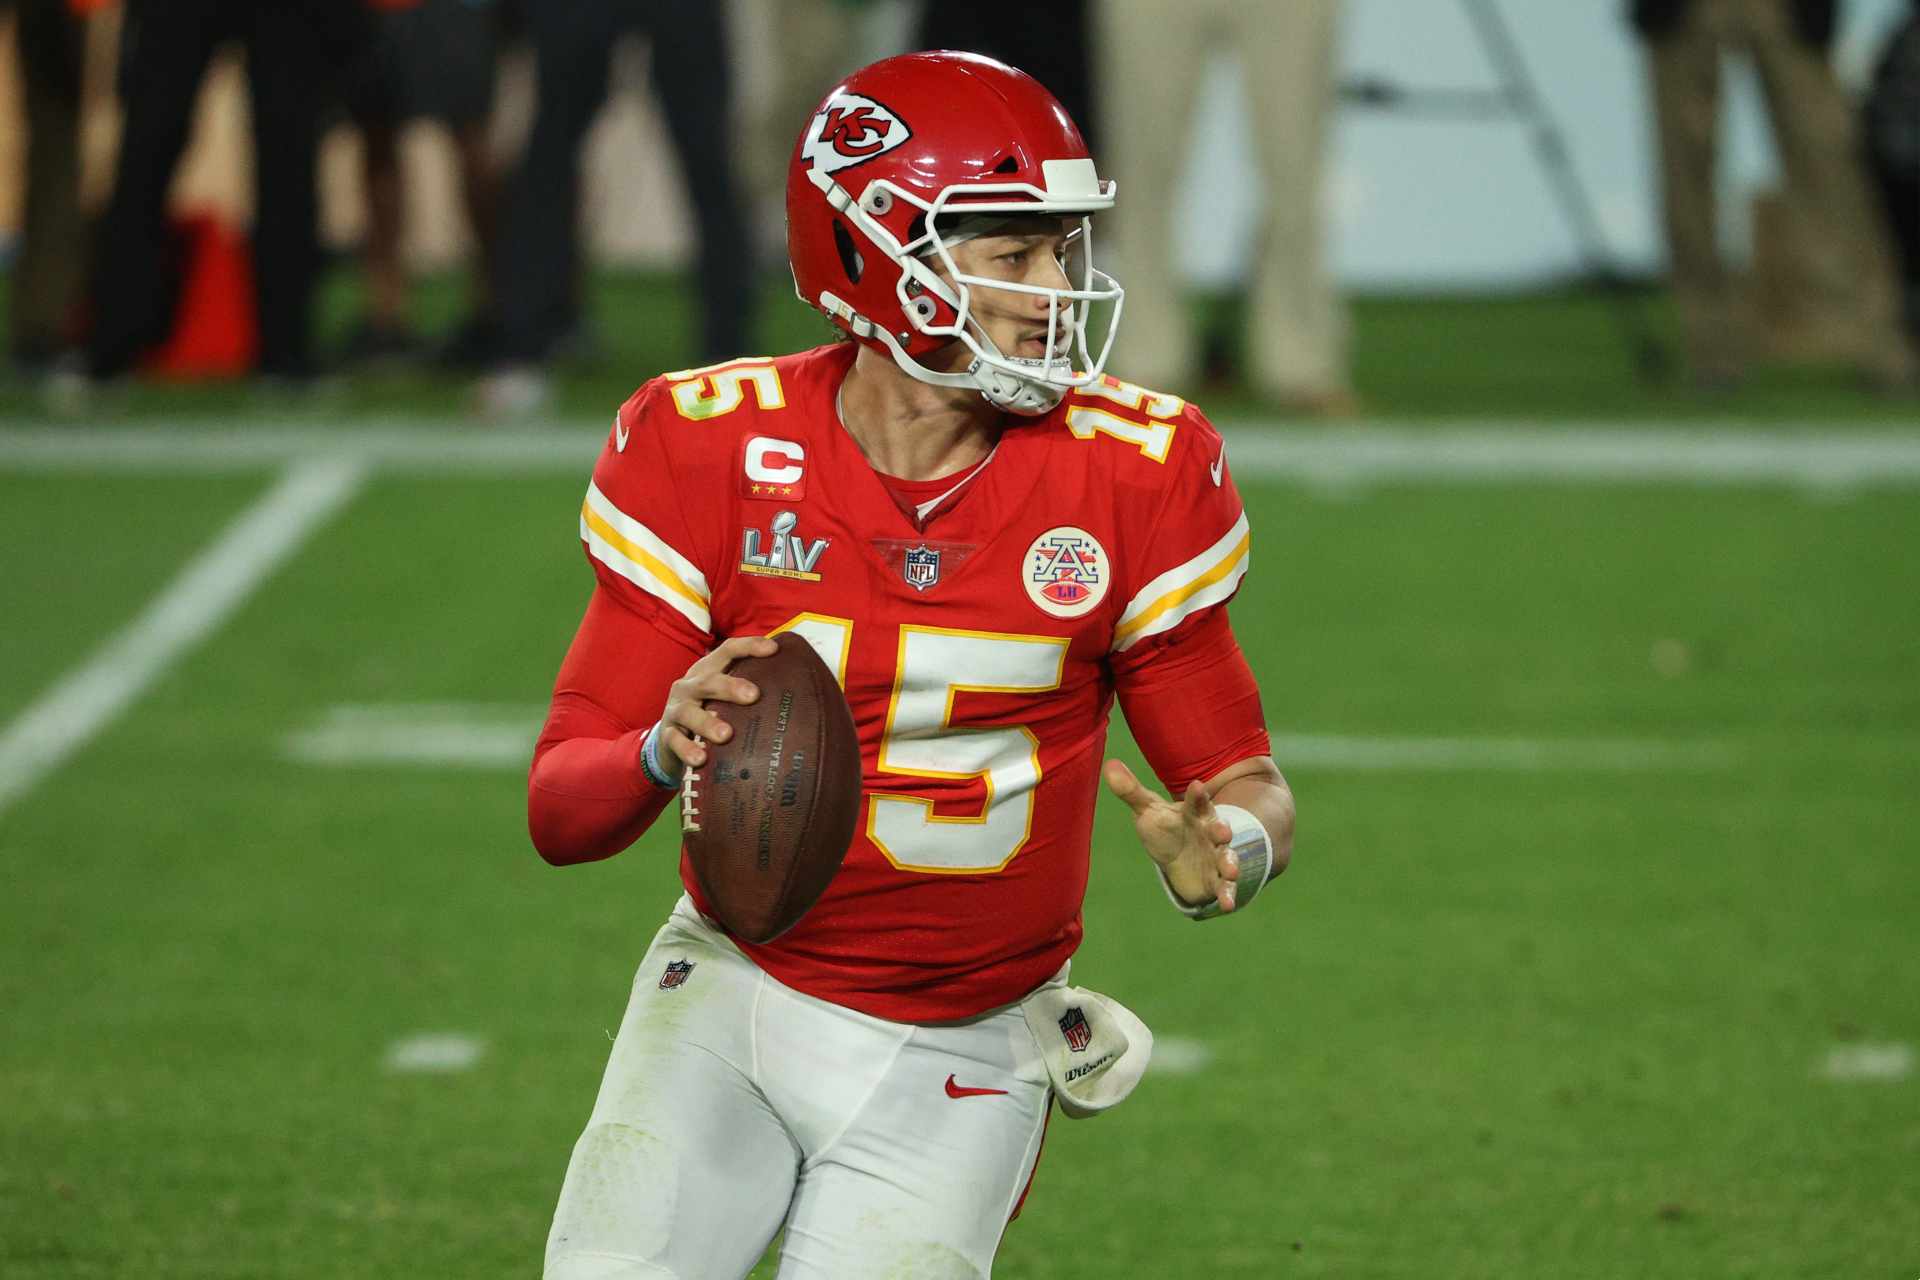 TAMPA, FLORIDA - FEBRUARY 07: Patrick Mahomes #15 of the Kansas City Chiefs looks to pass against the Tampa Bay Buccaneers in Super Bowl LV at Raymond James Stadium on February 07, 2021 in Tampa, Florida. (Photo by Patrick Smith/Getty Images)